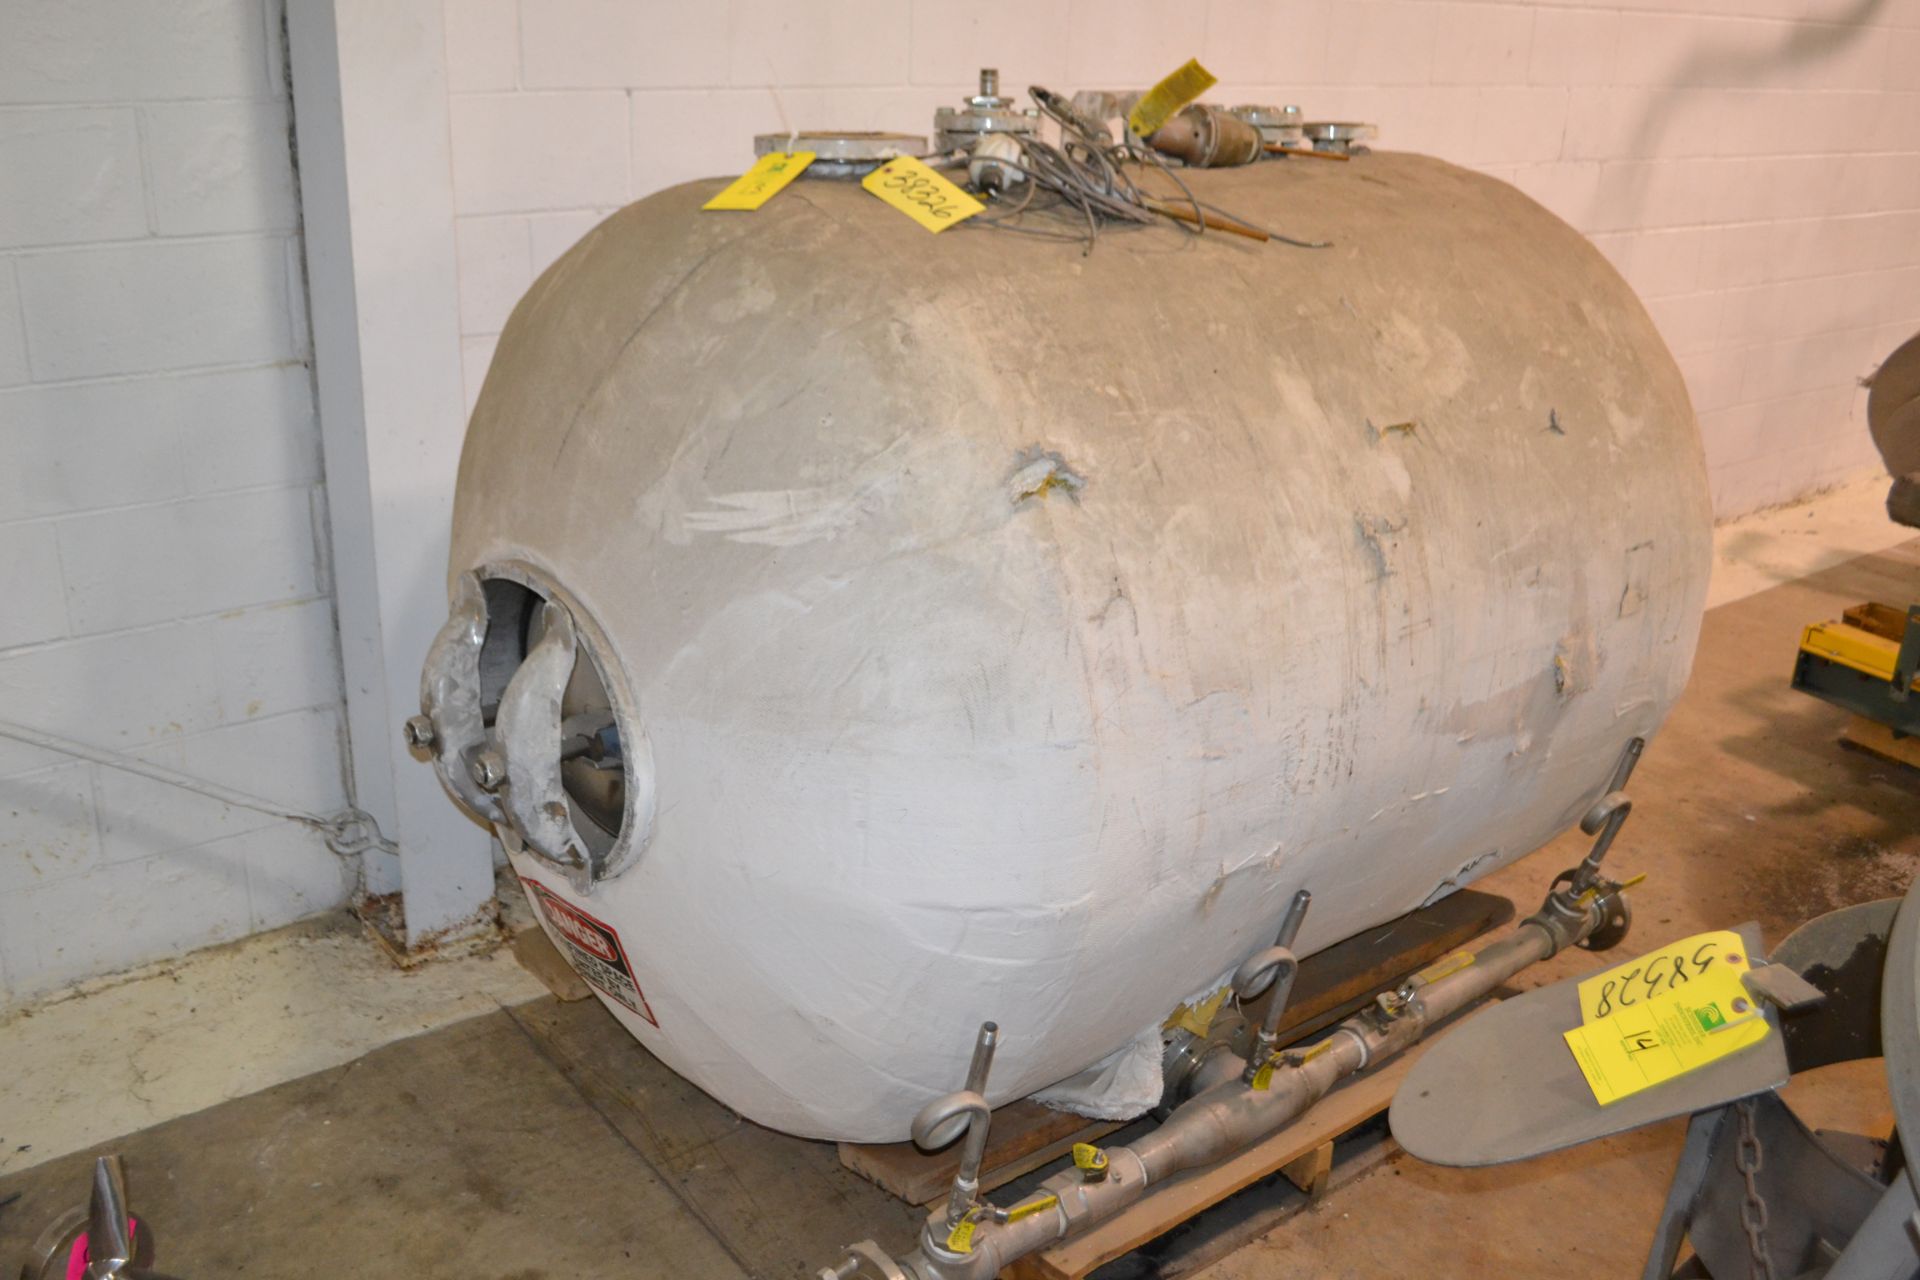 Clawson tank Company 500 gallon stainless steel pressure vessel, 150psi, 2002, serial number 61614,